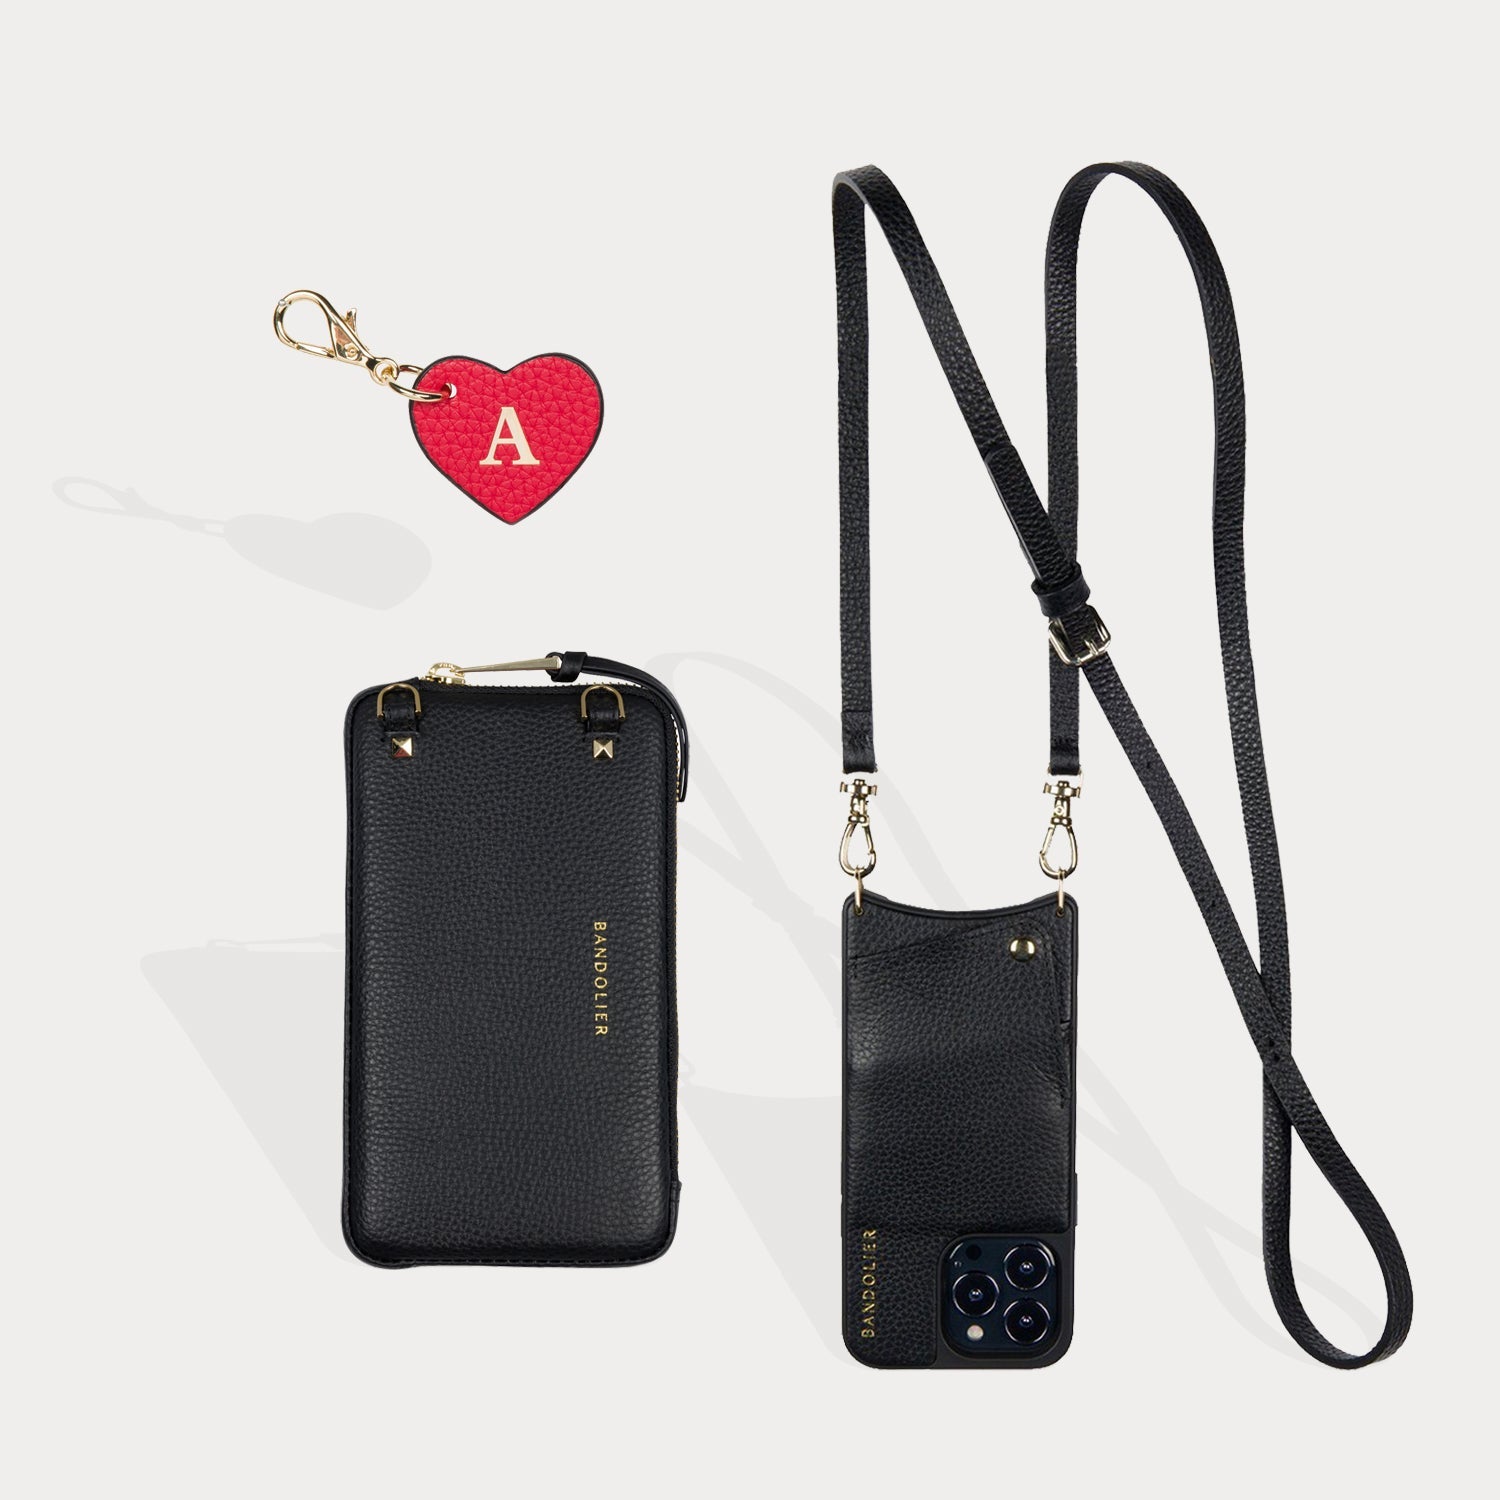 Tote Bag and Mini Heart Pouch Set - Black/Gold – Bandolier